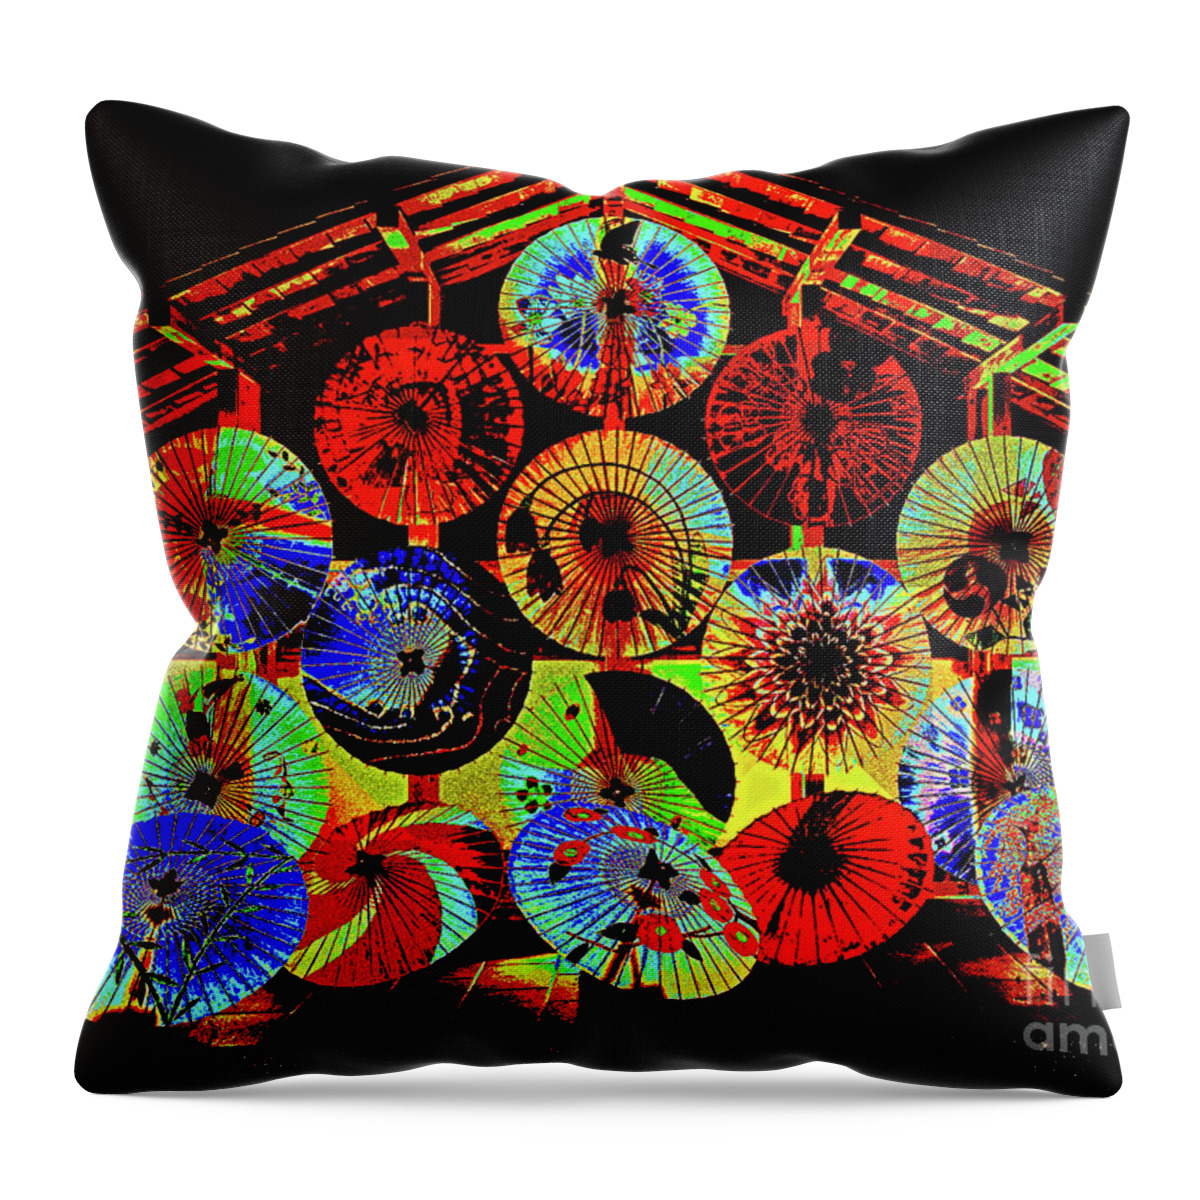 Lanterns Throw Pillow featuring the digital art Colorful Lanterns by Mimulux Patricia No